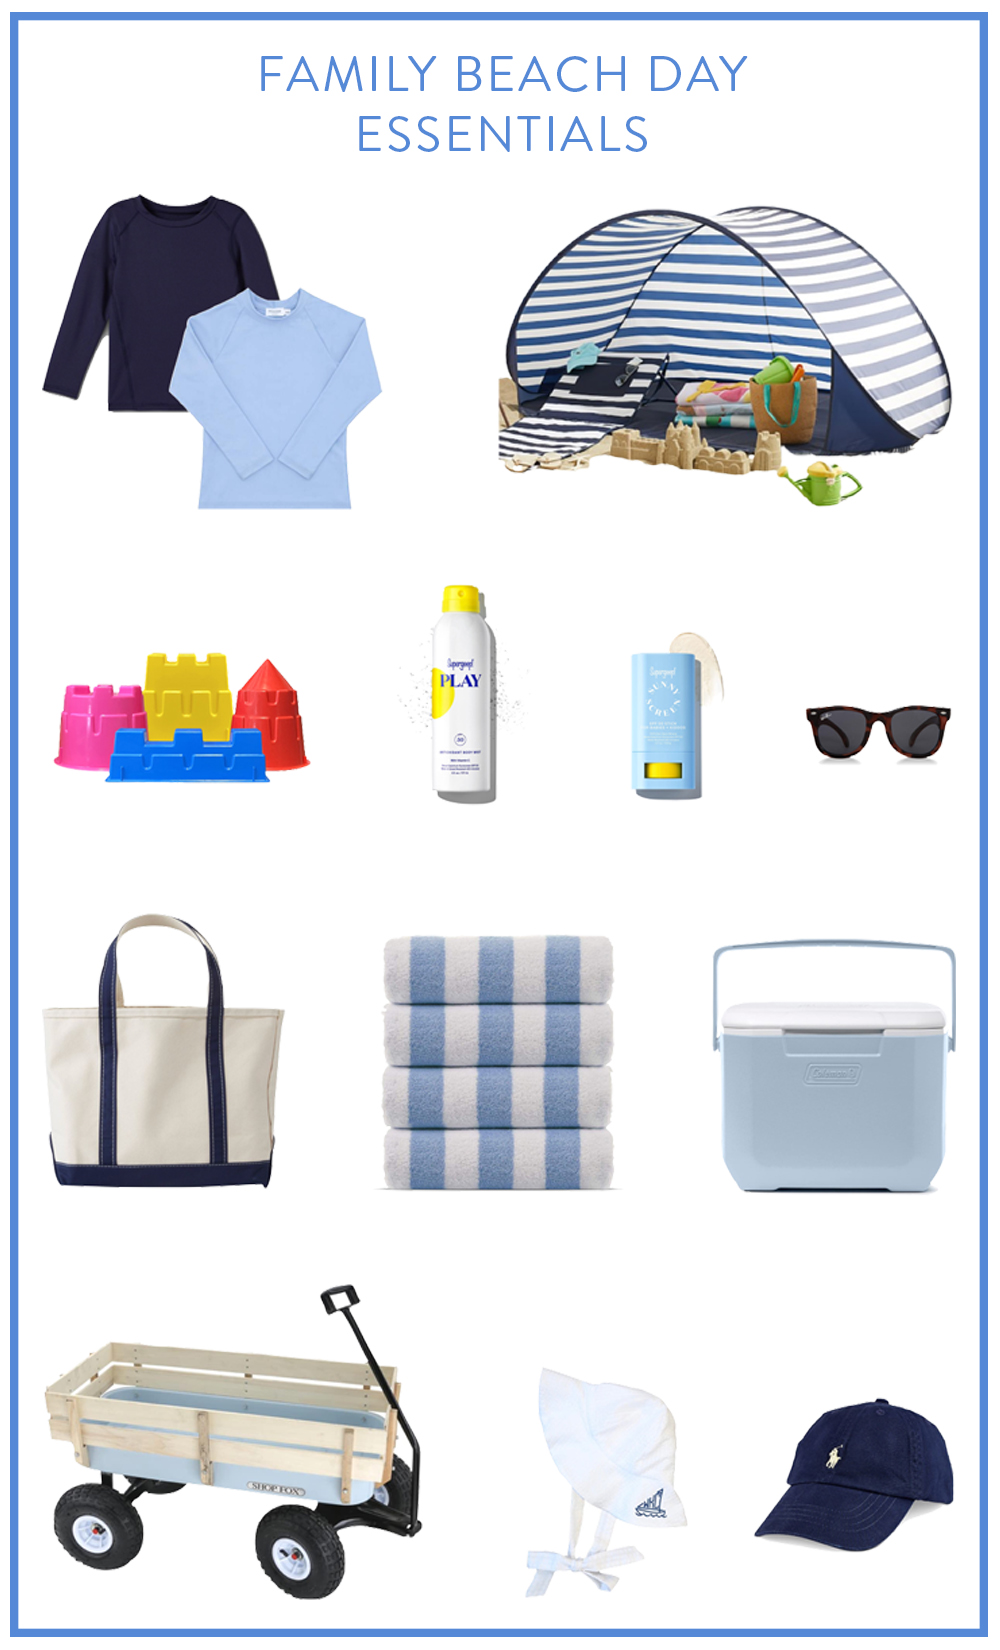 OUR FAMILY BEACH DAY ESSENTIALS